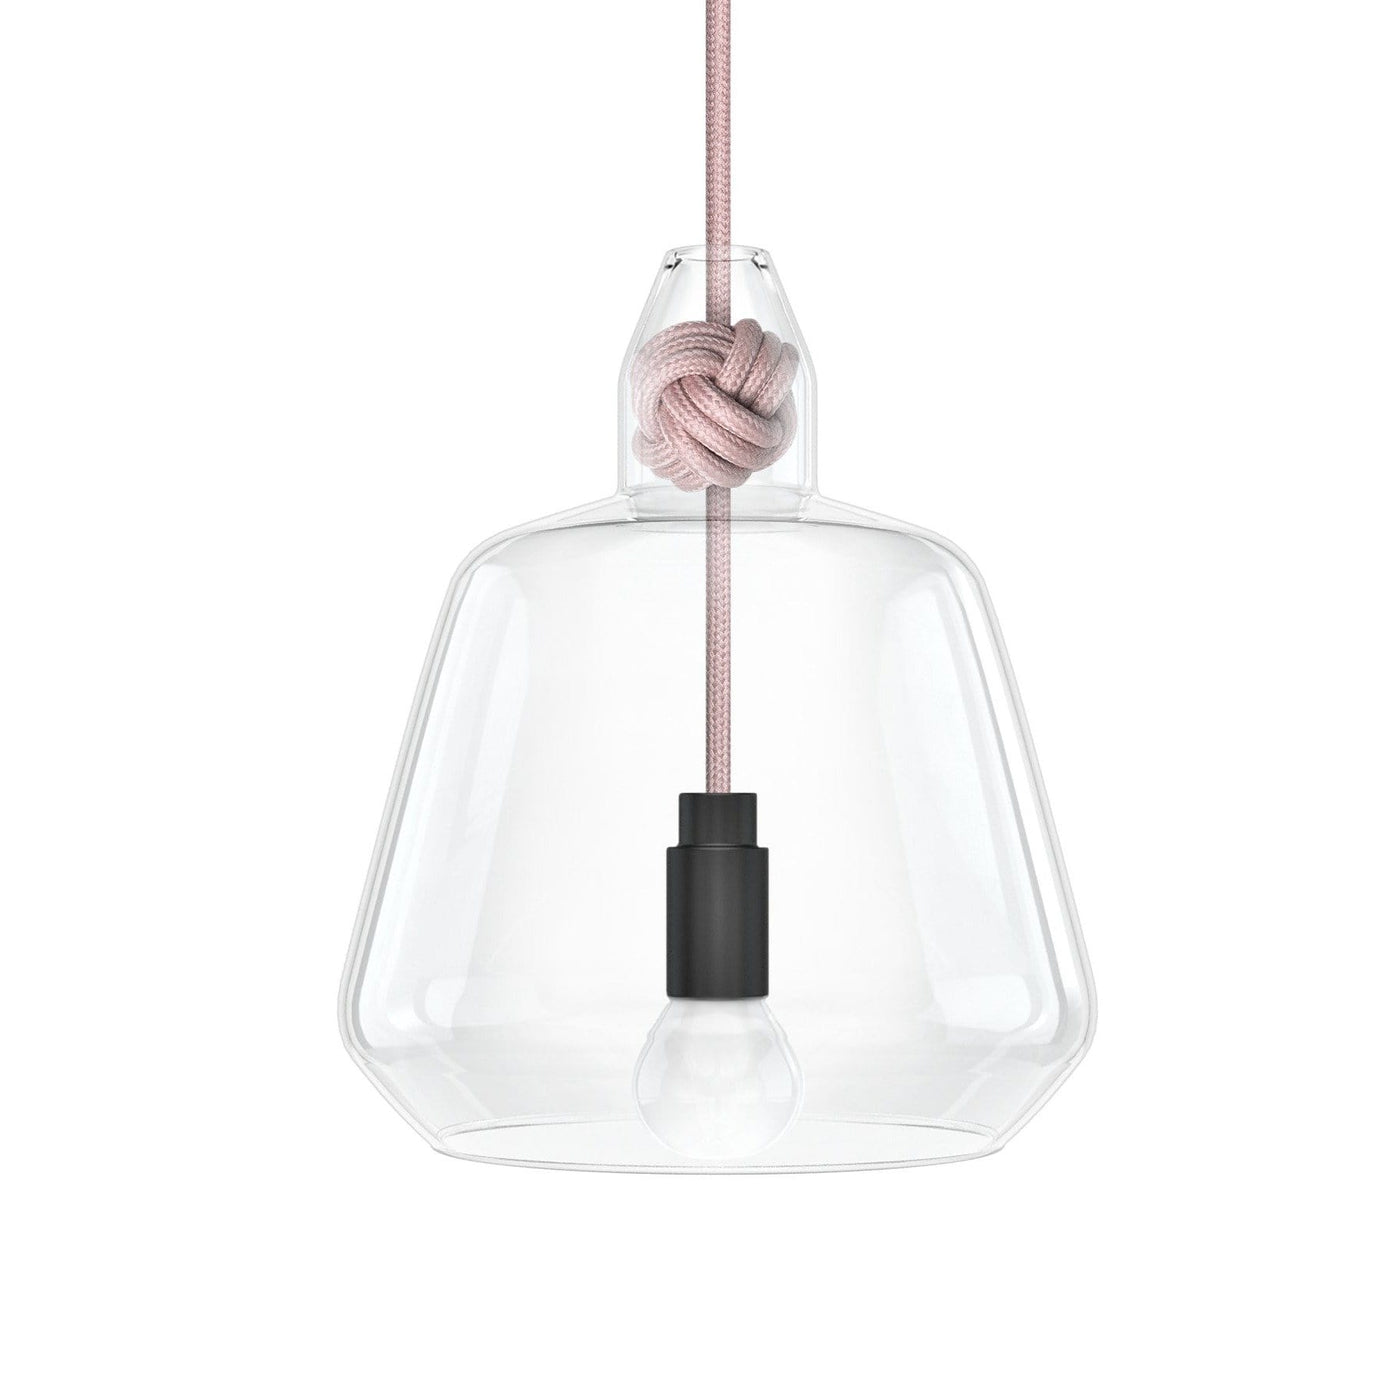 Knot Lamp is made from handblown glass with two shade designs, both supported by a monkey fist knot in a choice of 6 colours.  Pictured here with dusty pink fabric cord.  Beautiful, simple and versatile lighting.